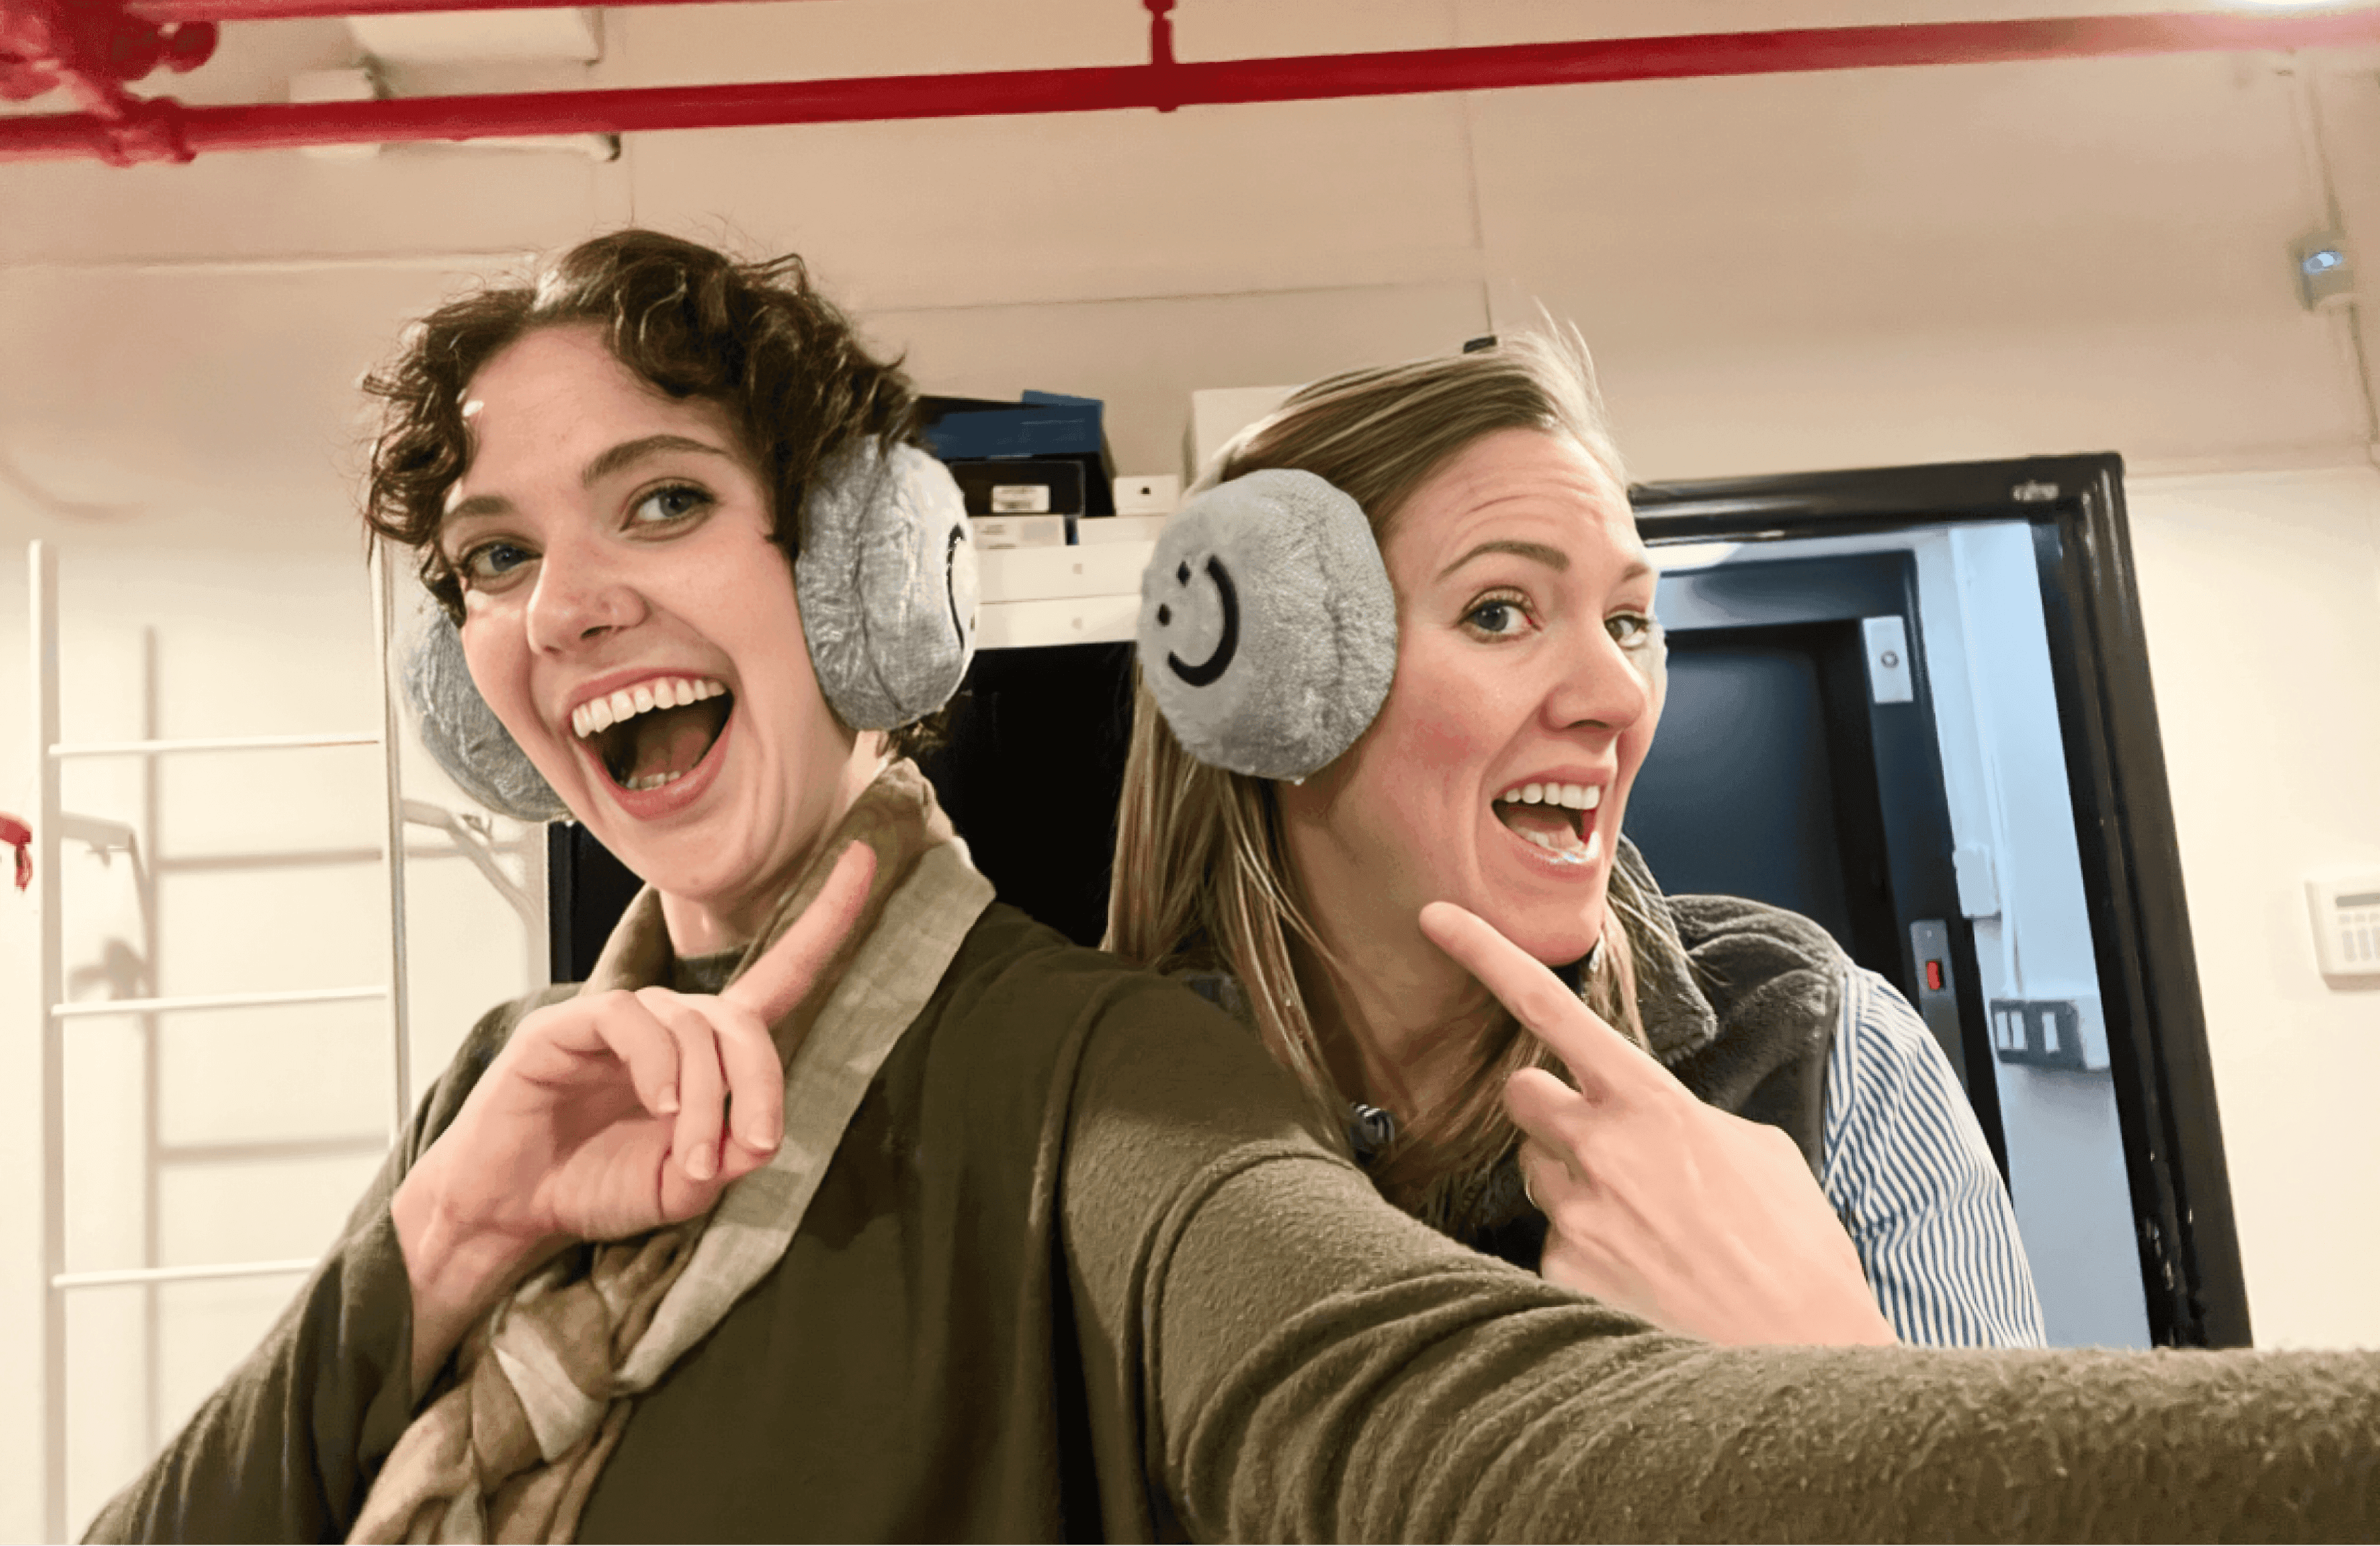 Selfie of two people, with large smiles, each pointing at fuzzy earmuffs they're wearing that feature the Dandi smiley logo.